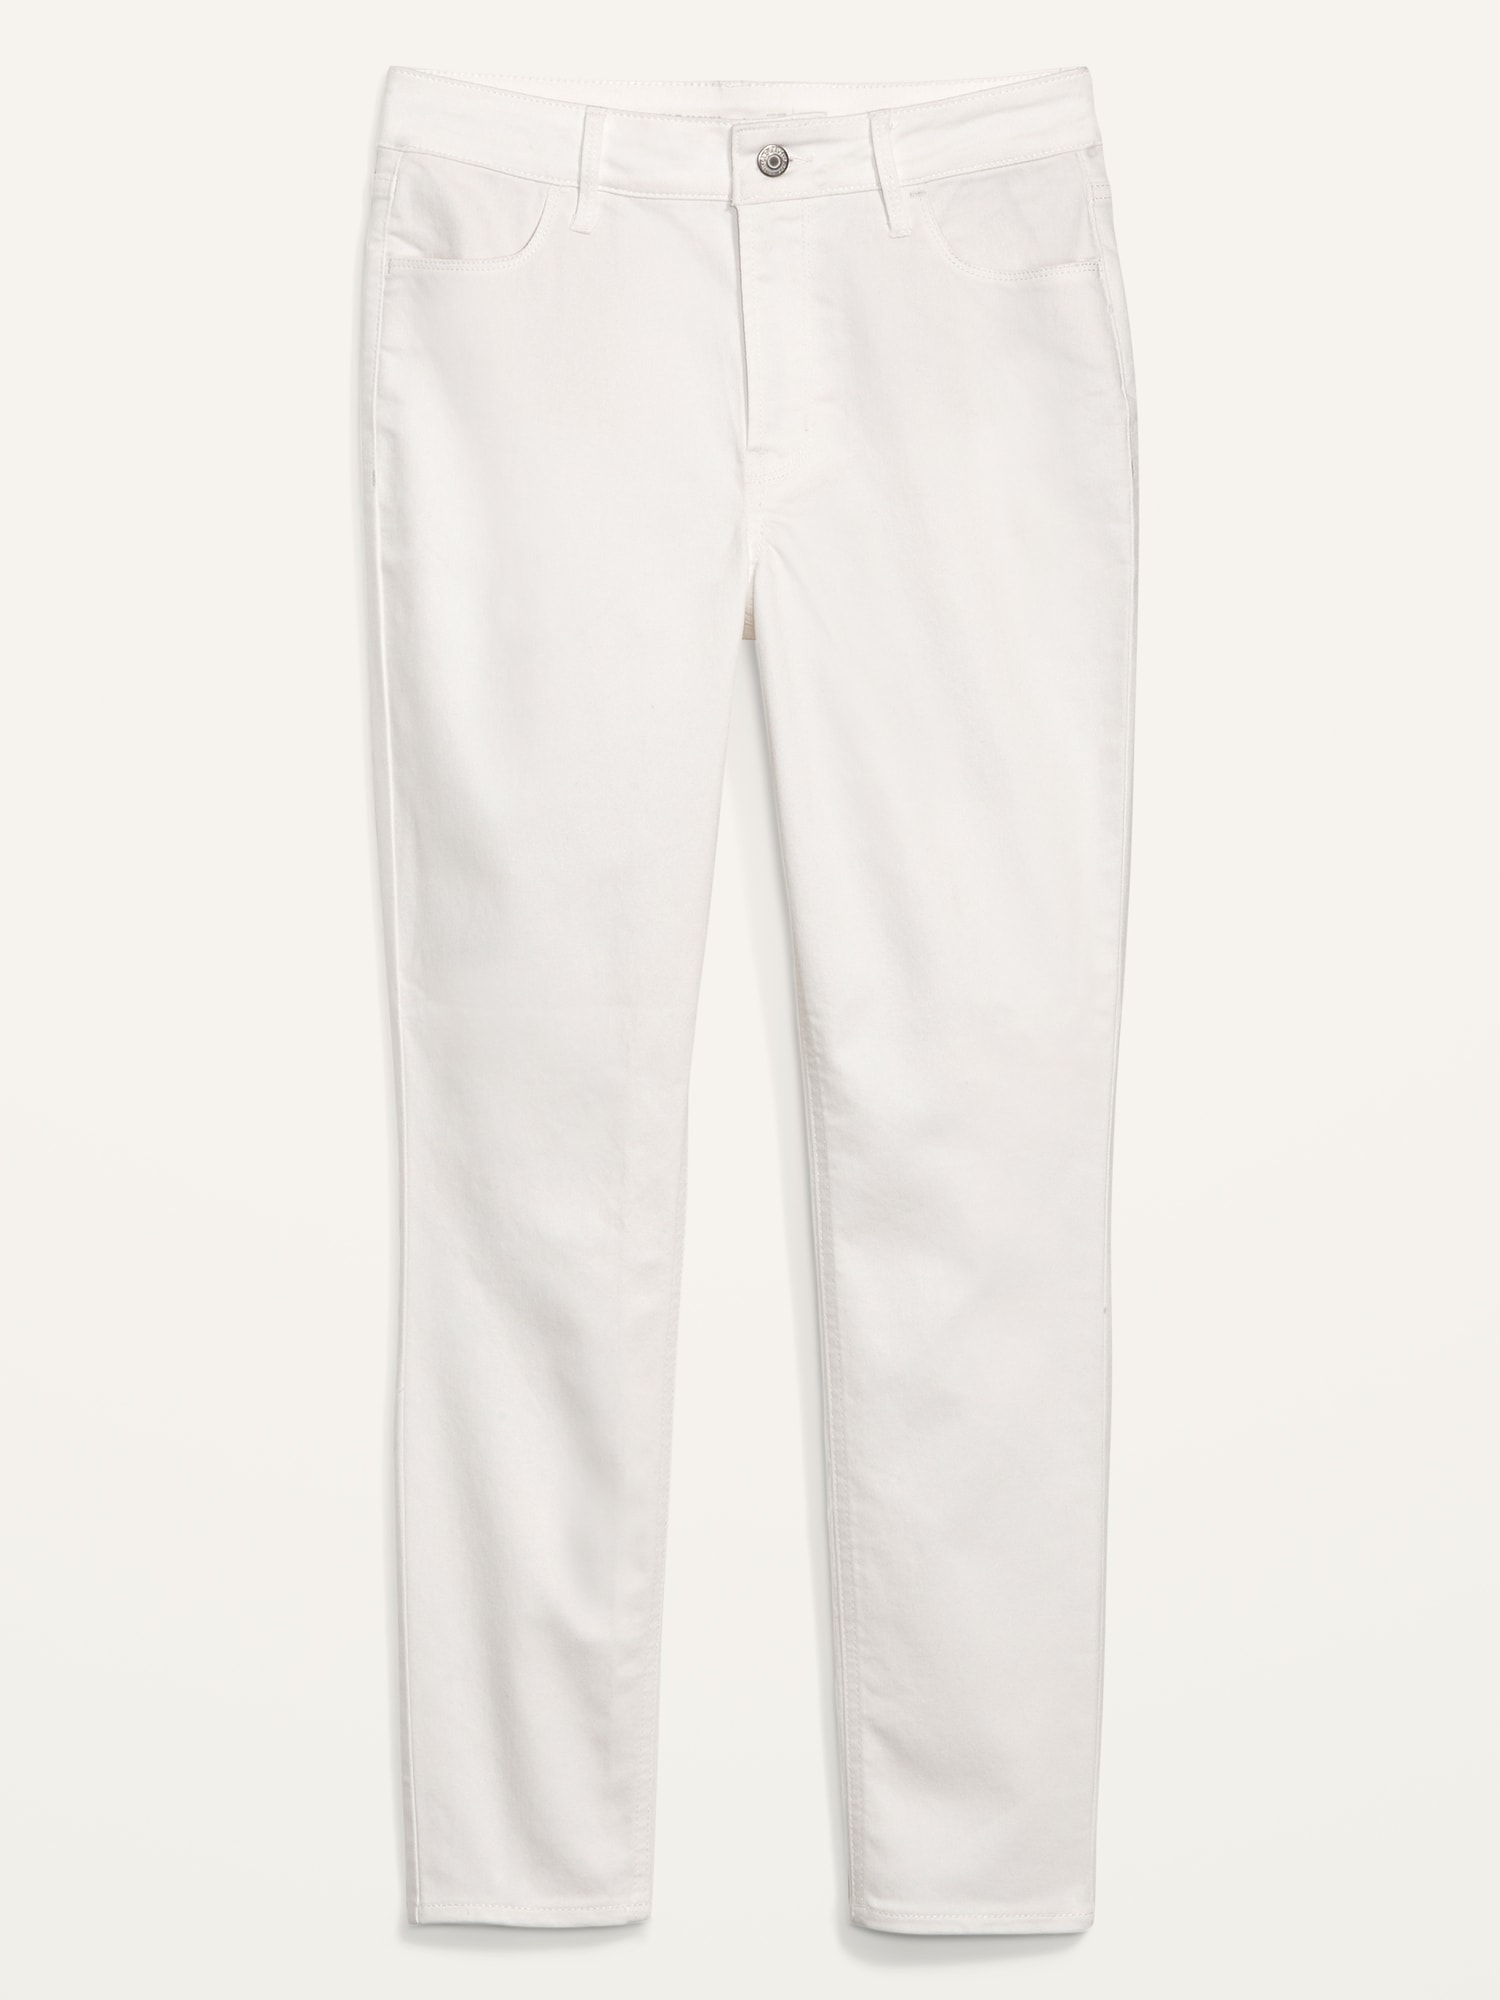 High-Waisted Super Skinny White Ankle Jean for Women | Old Navy